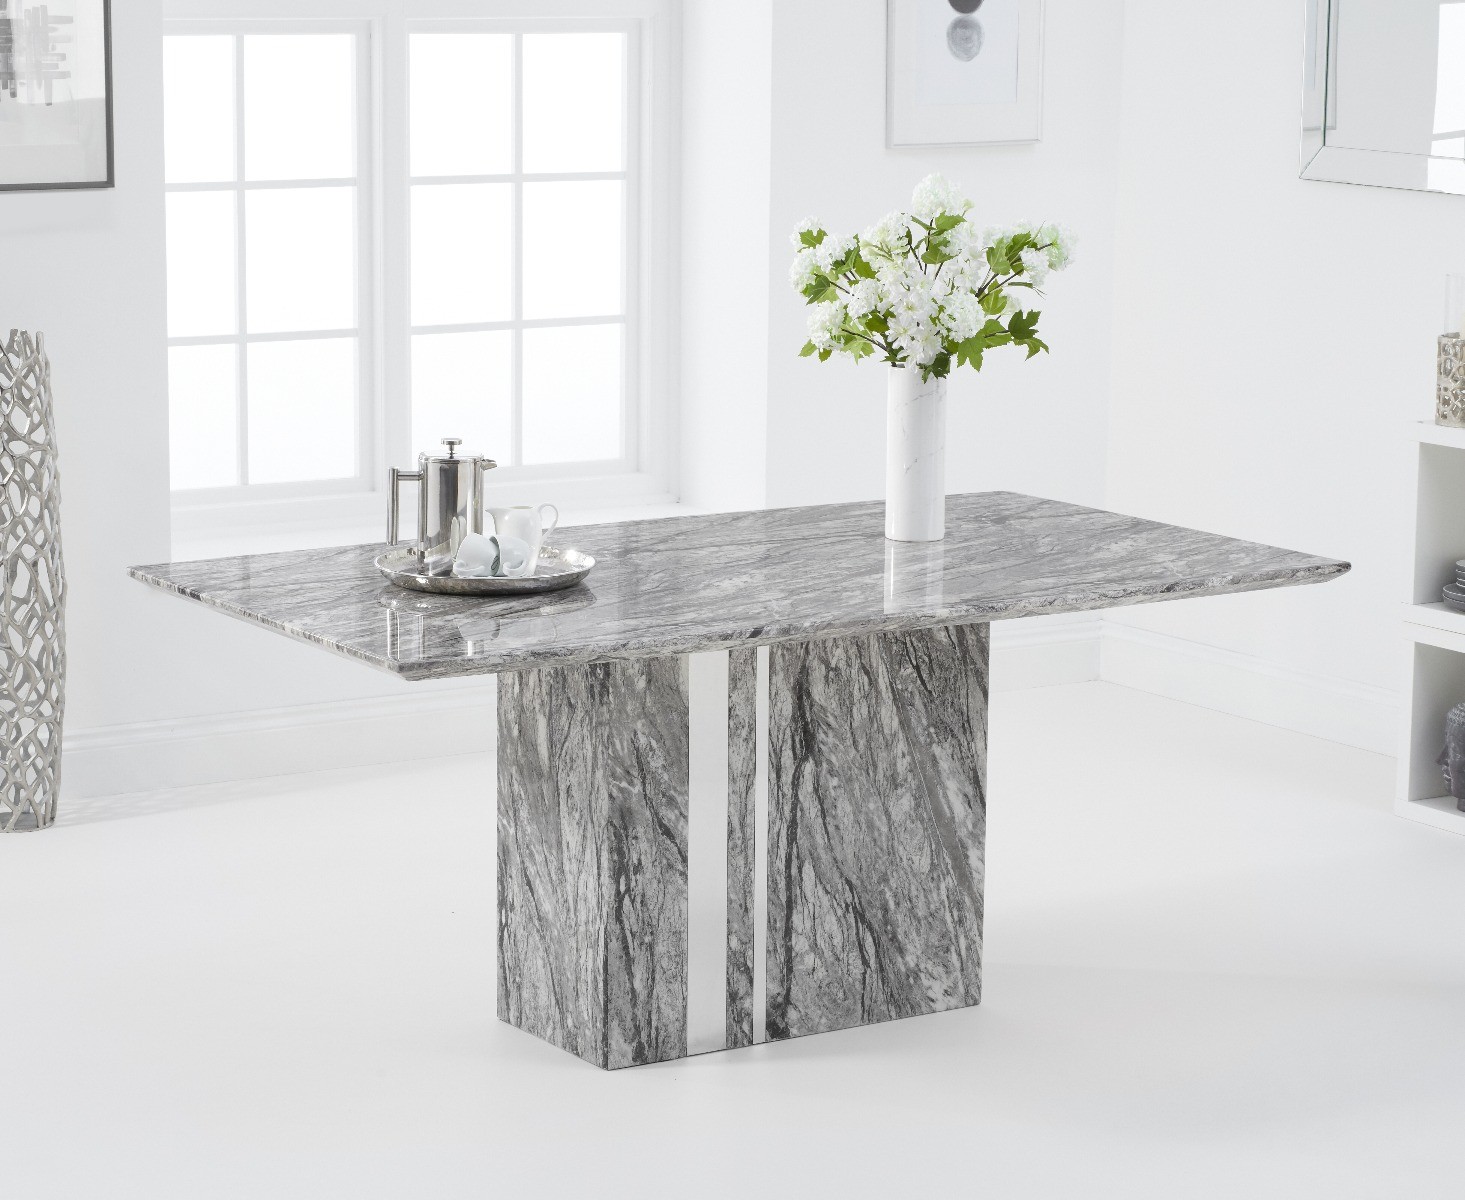 Photo 2 of Alicia 180cm grey marble dining table with 4 white aldo chairs